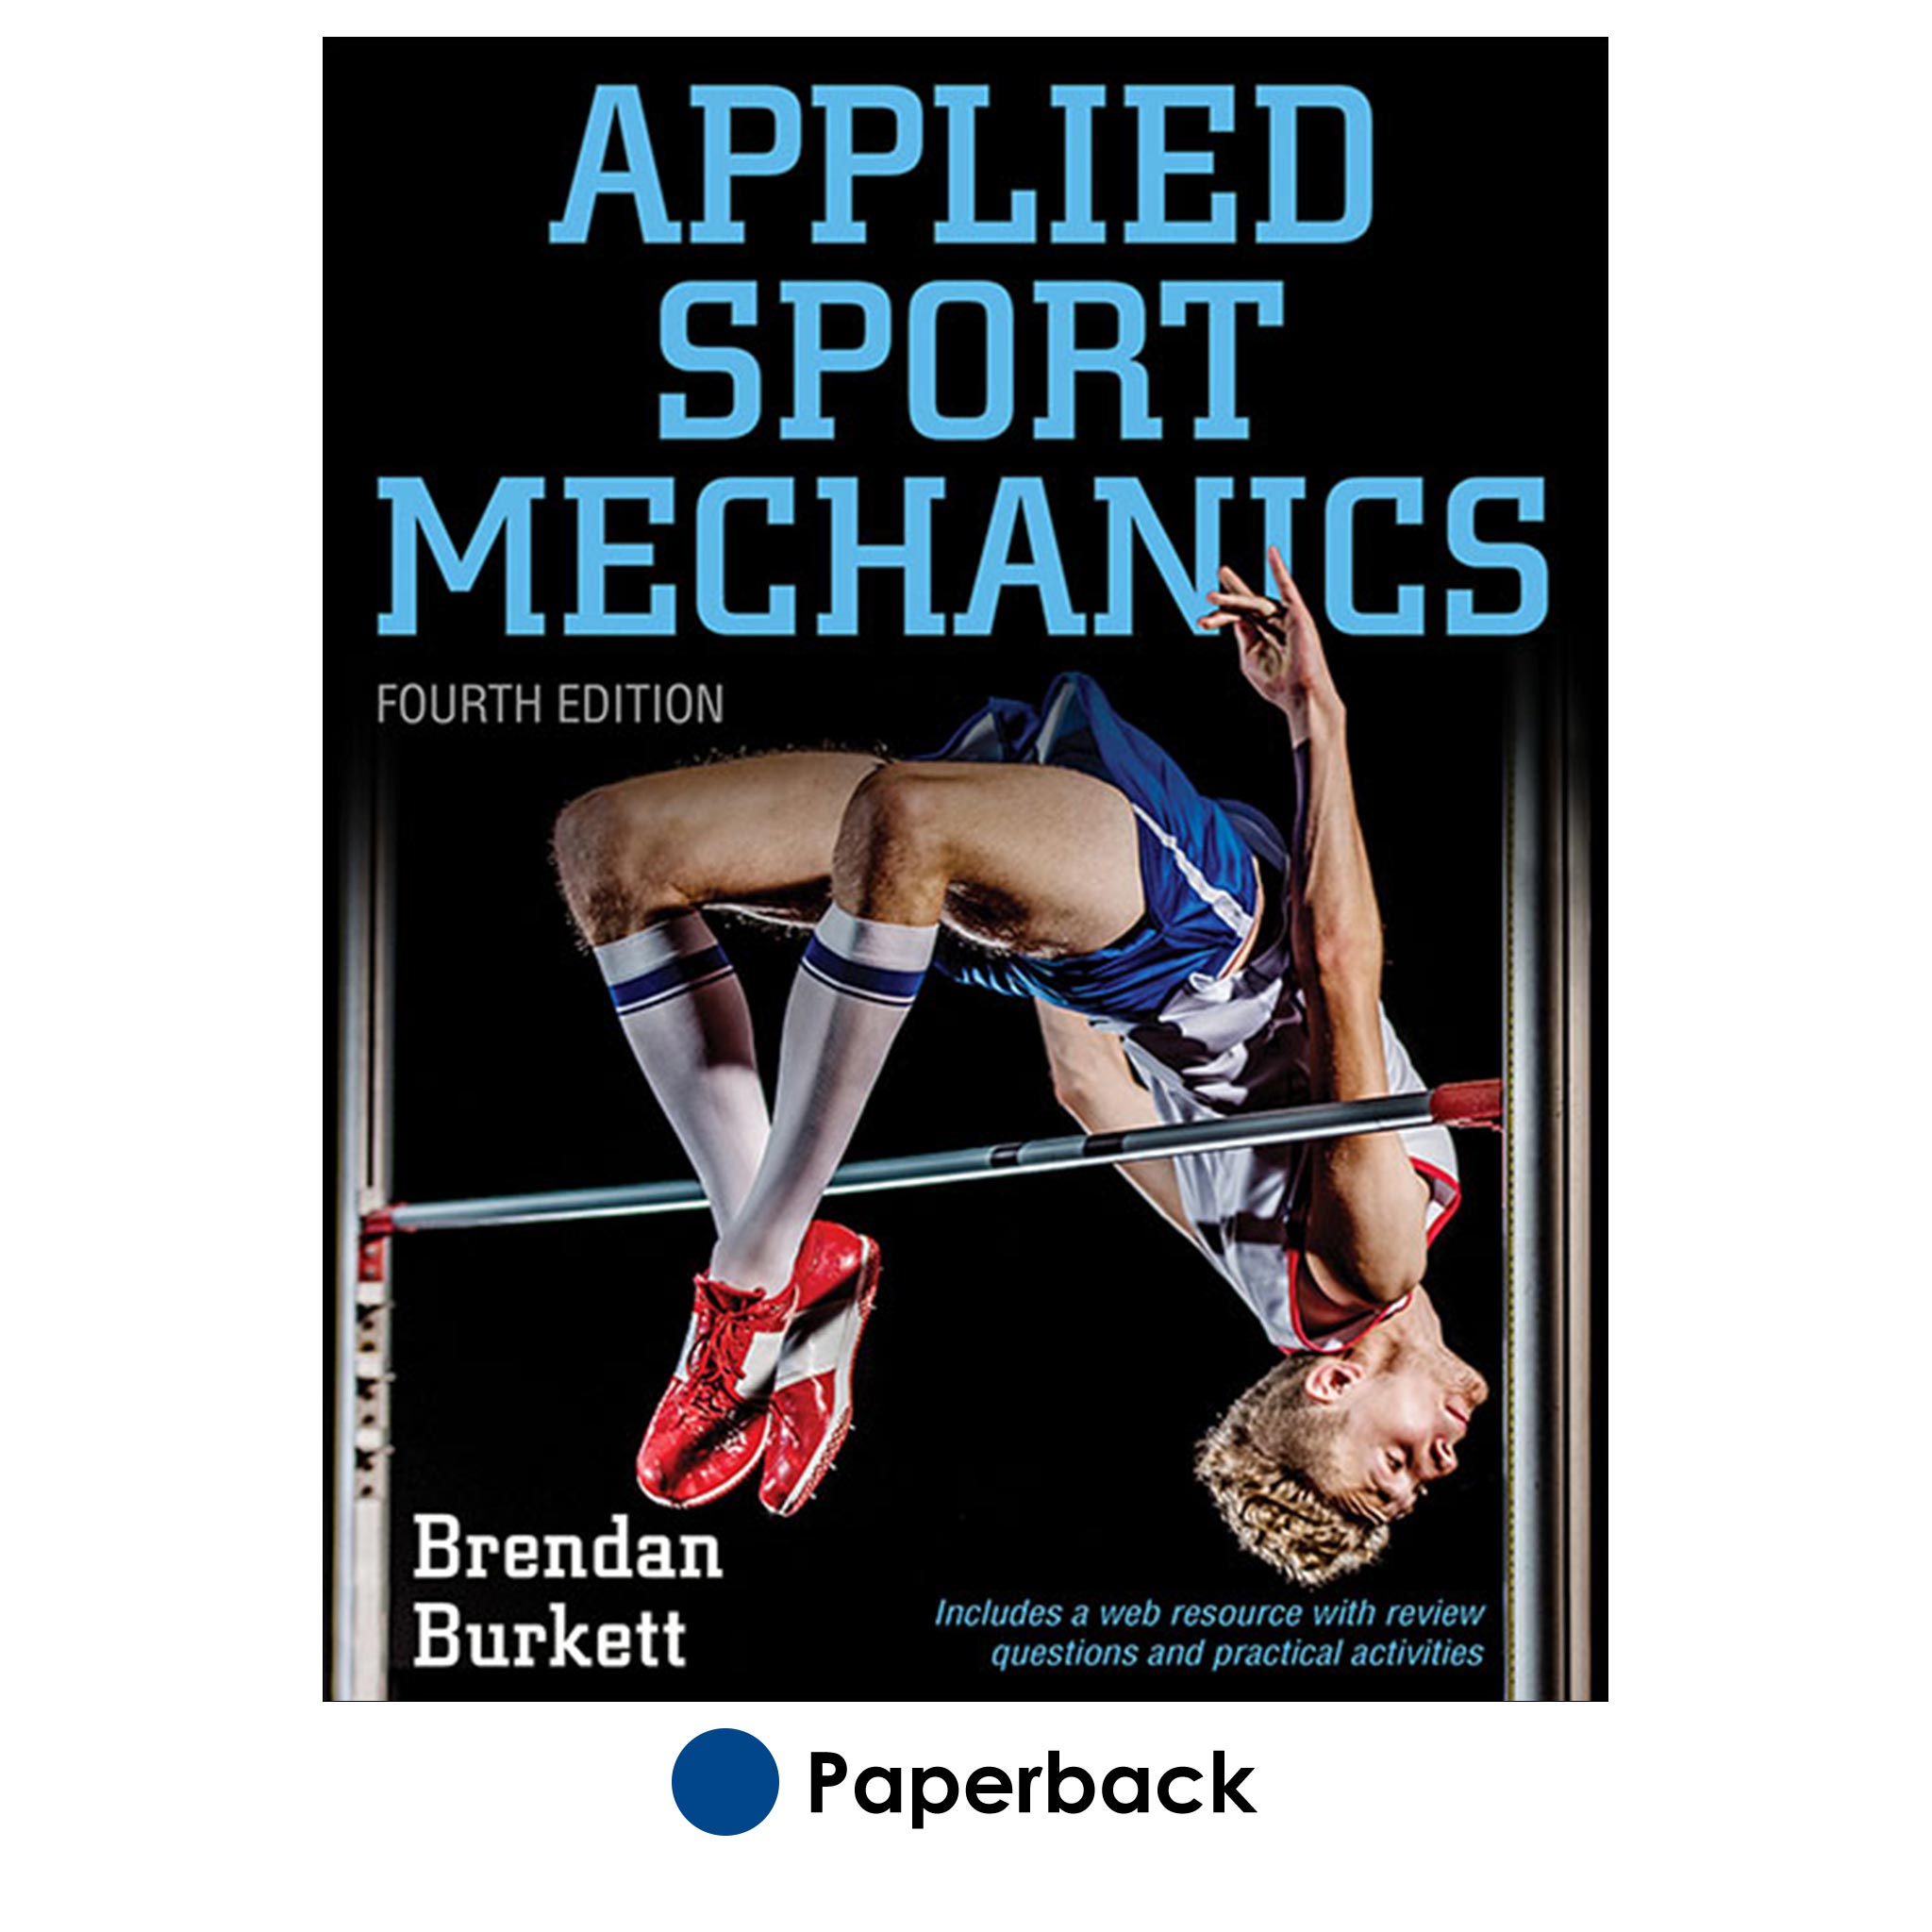 Applied Sport Mechanics 4th Edition With Web Resource